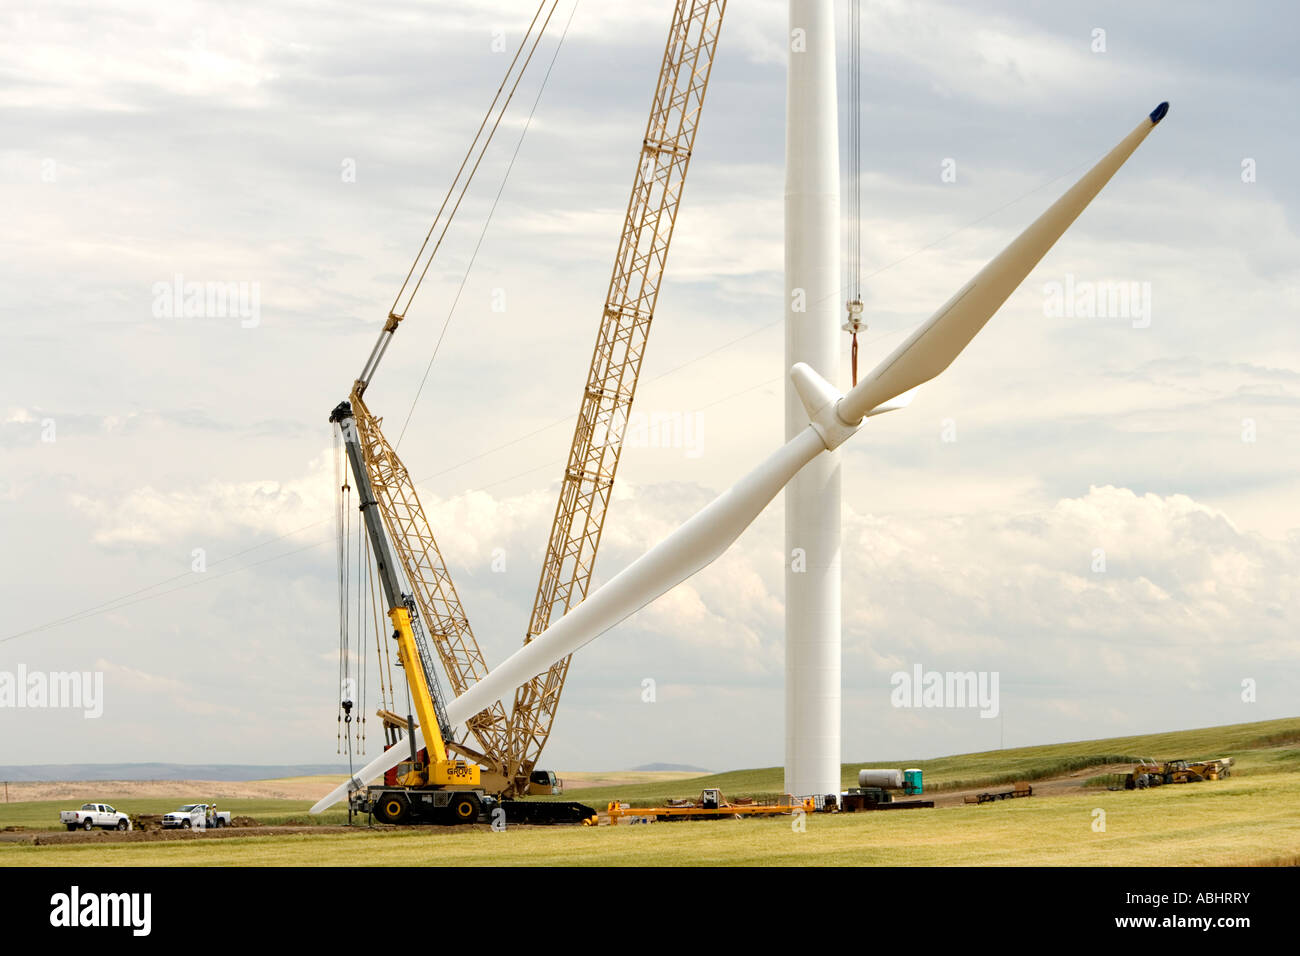 Wind Turbine construction, crane raising propeller to be attached to generator. Stock Photo